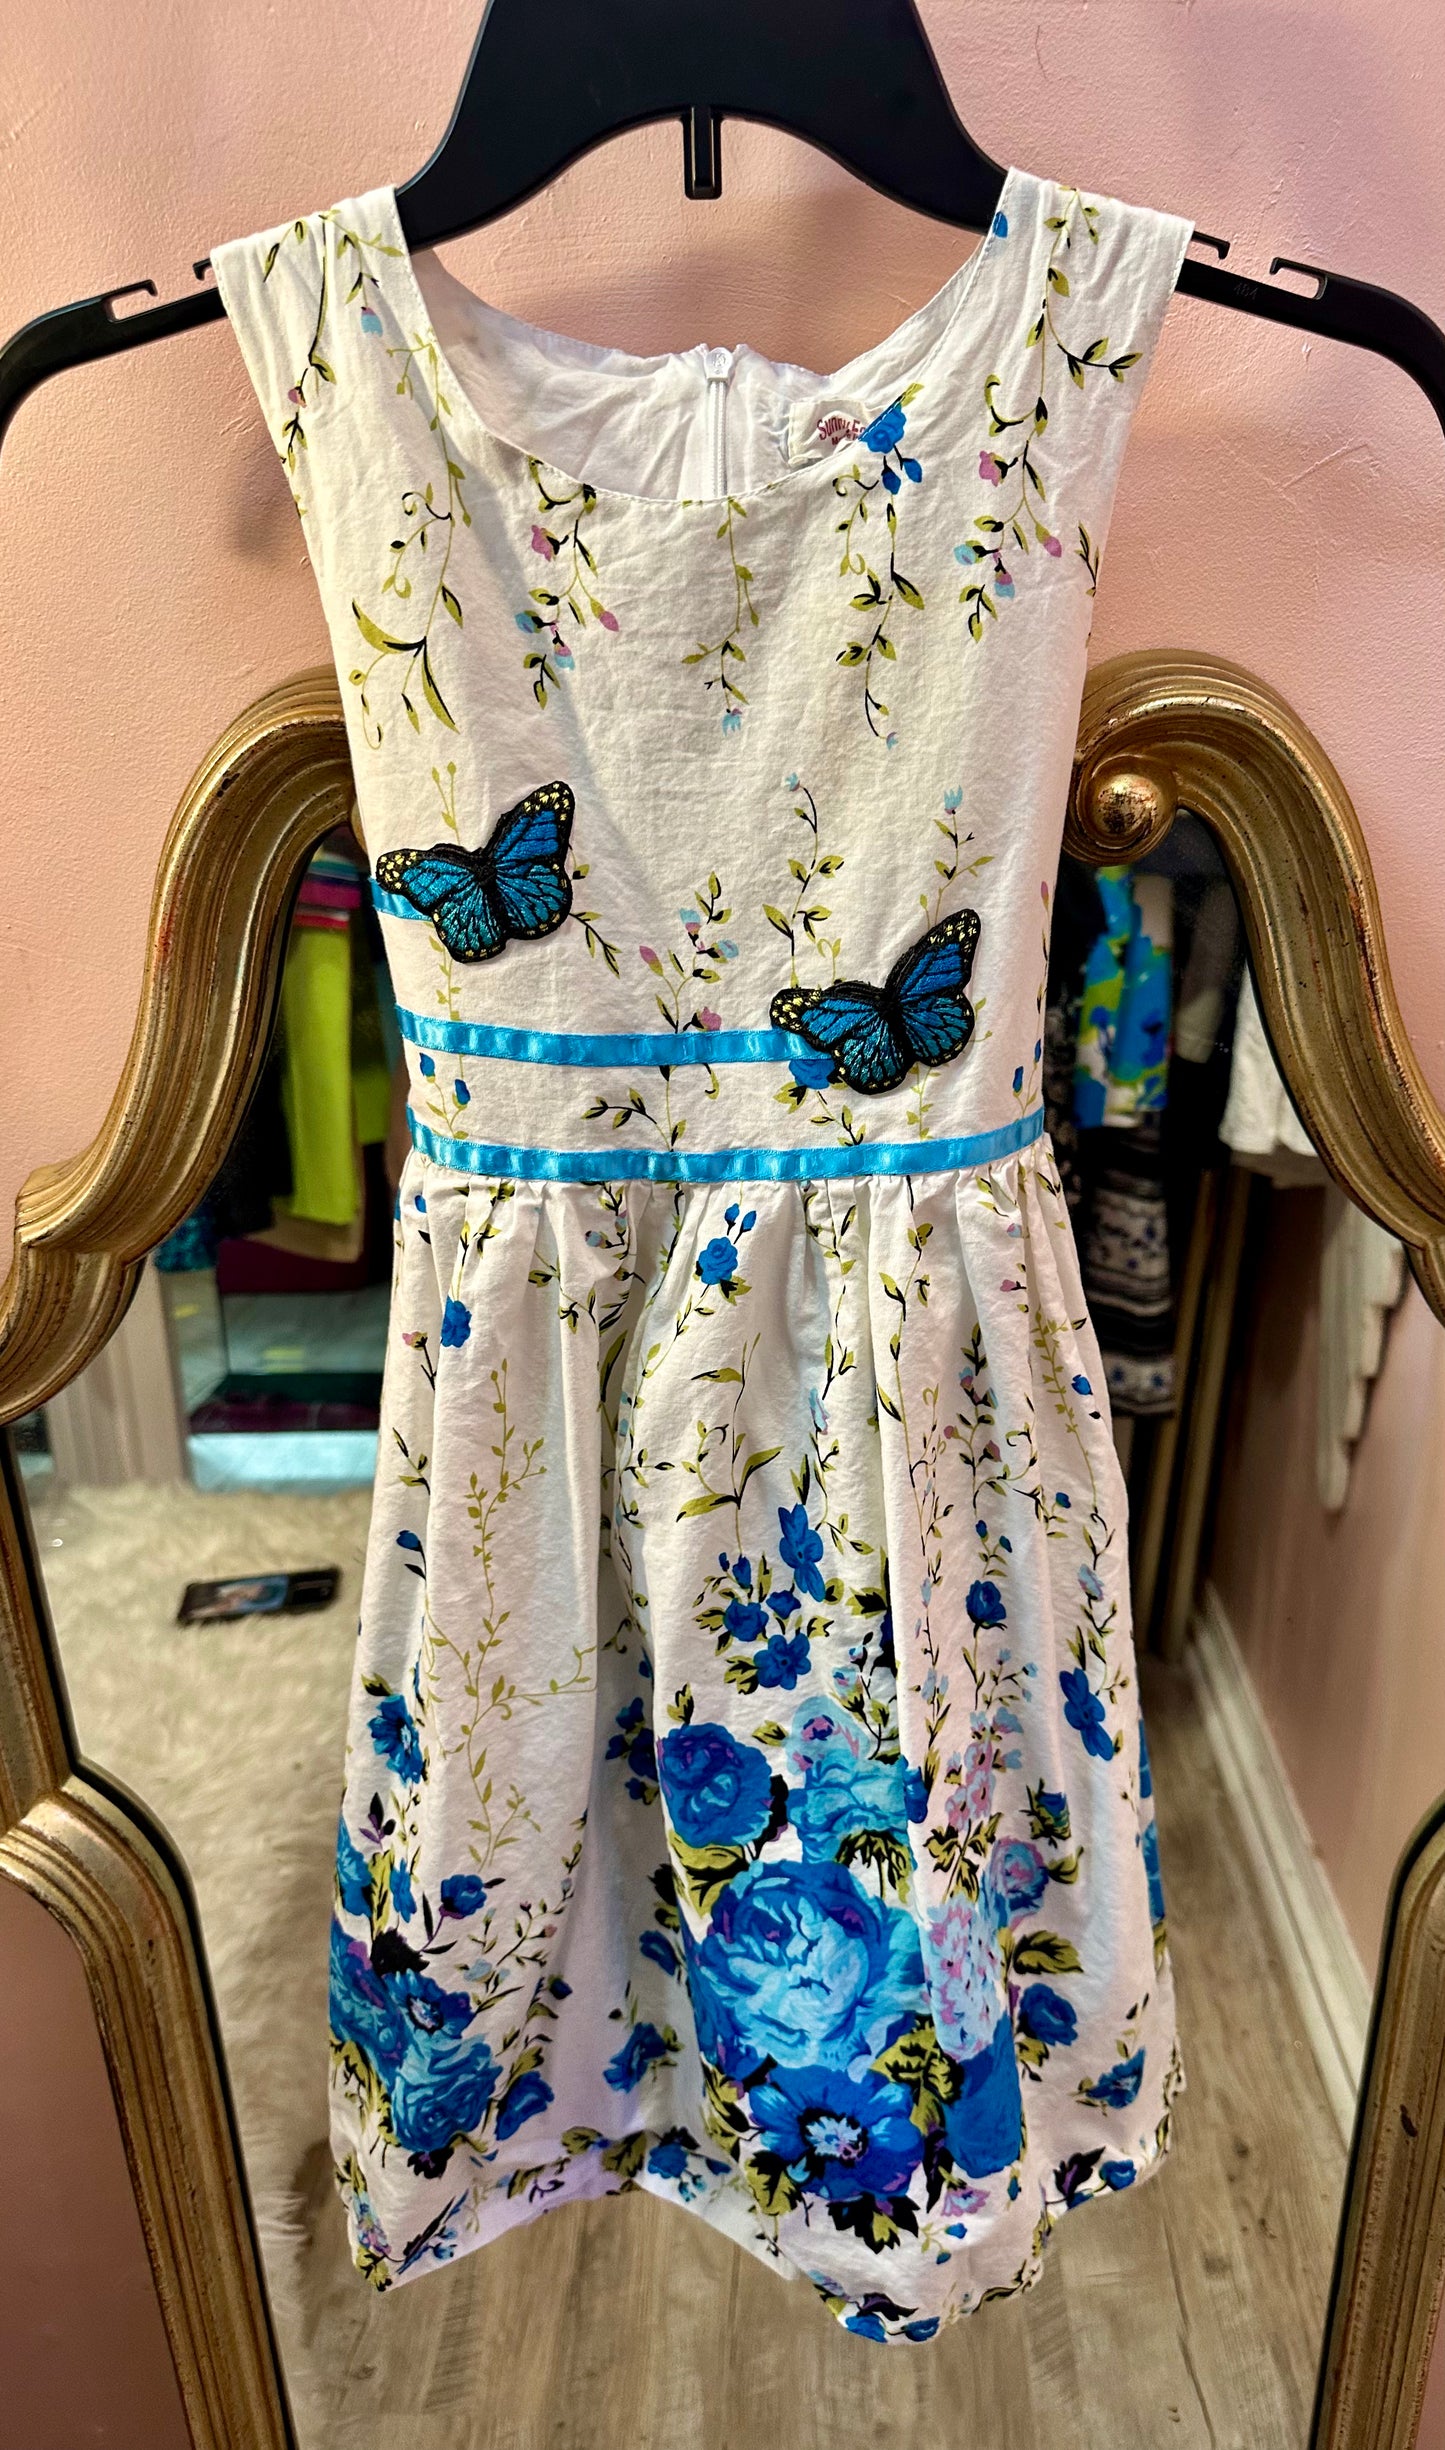 Sunny Fashion Girls Dress Blue Butterfly Floral Casual Party Size 9/10